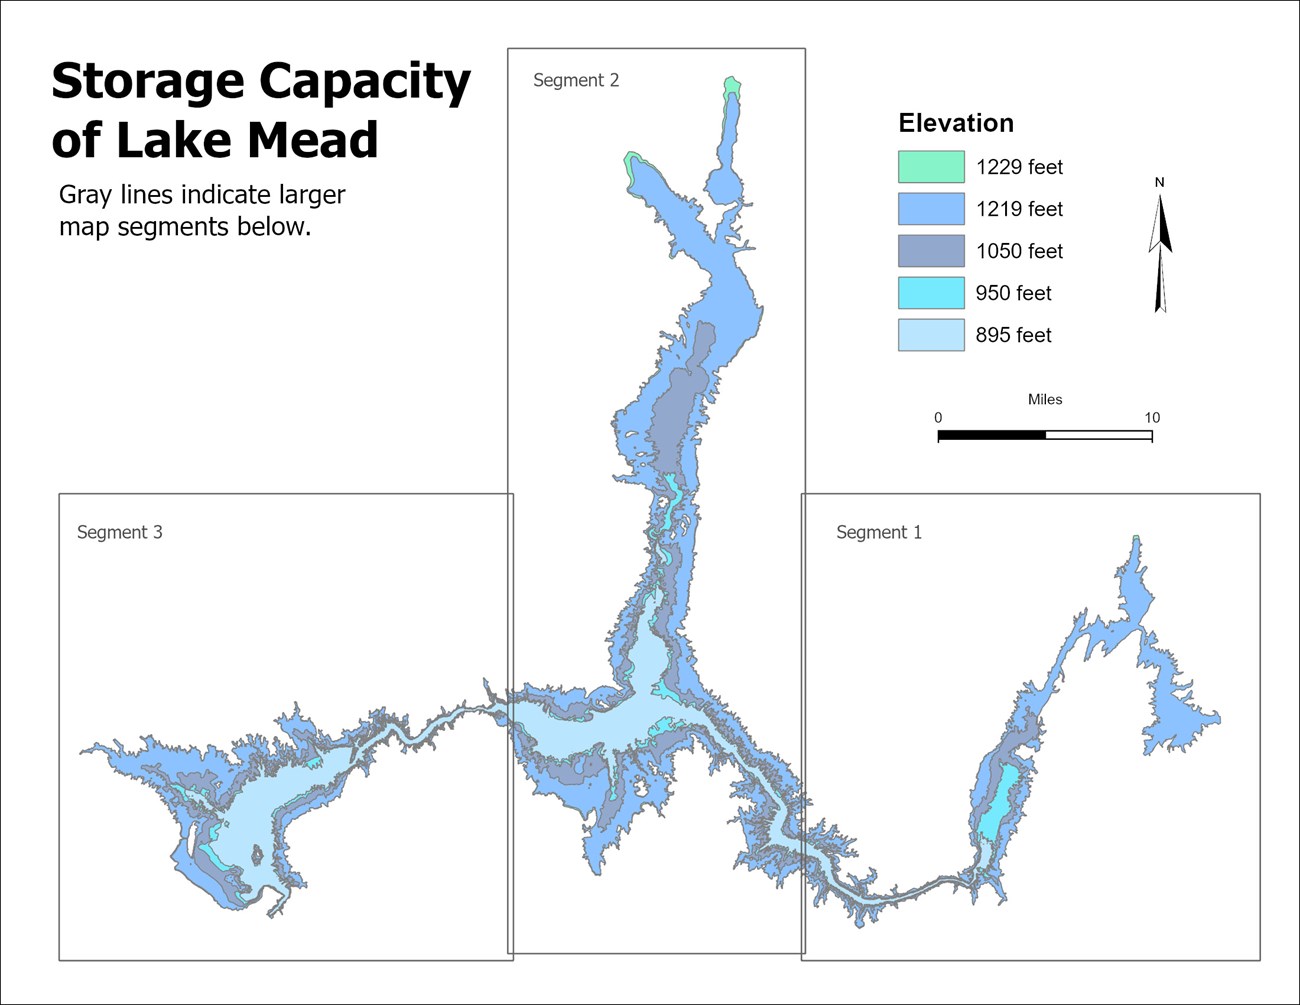 Storage Capacity of Lake Mead Overview elevations from 895 to 1229 feet